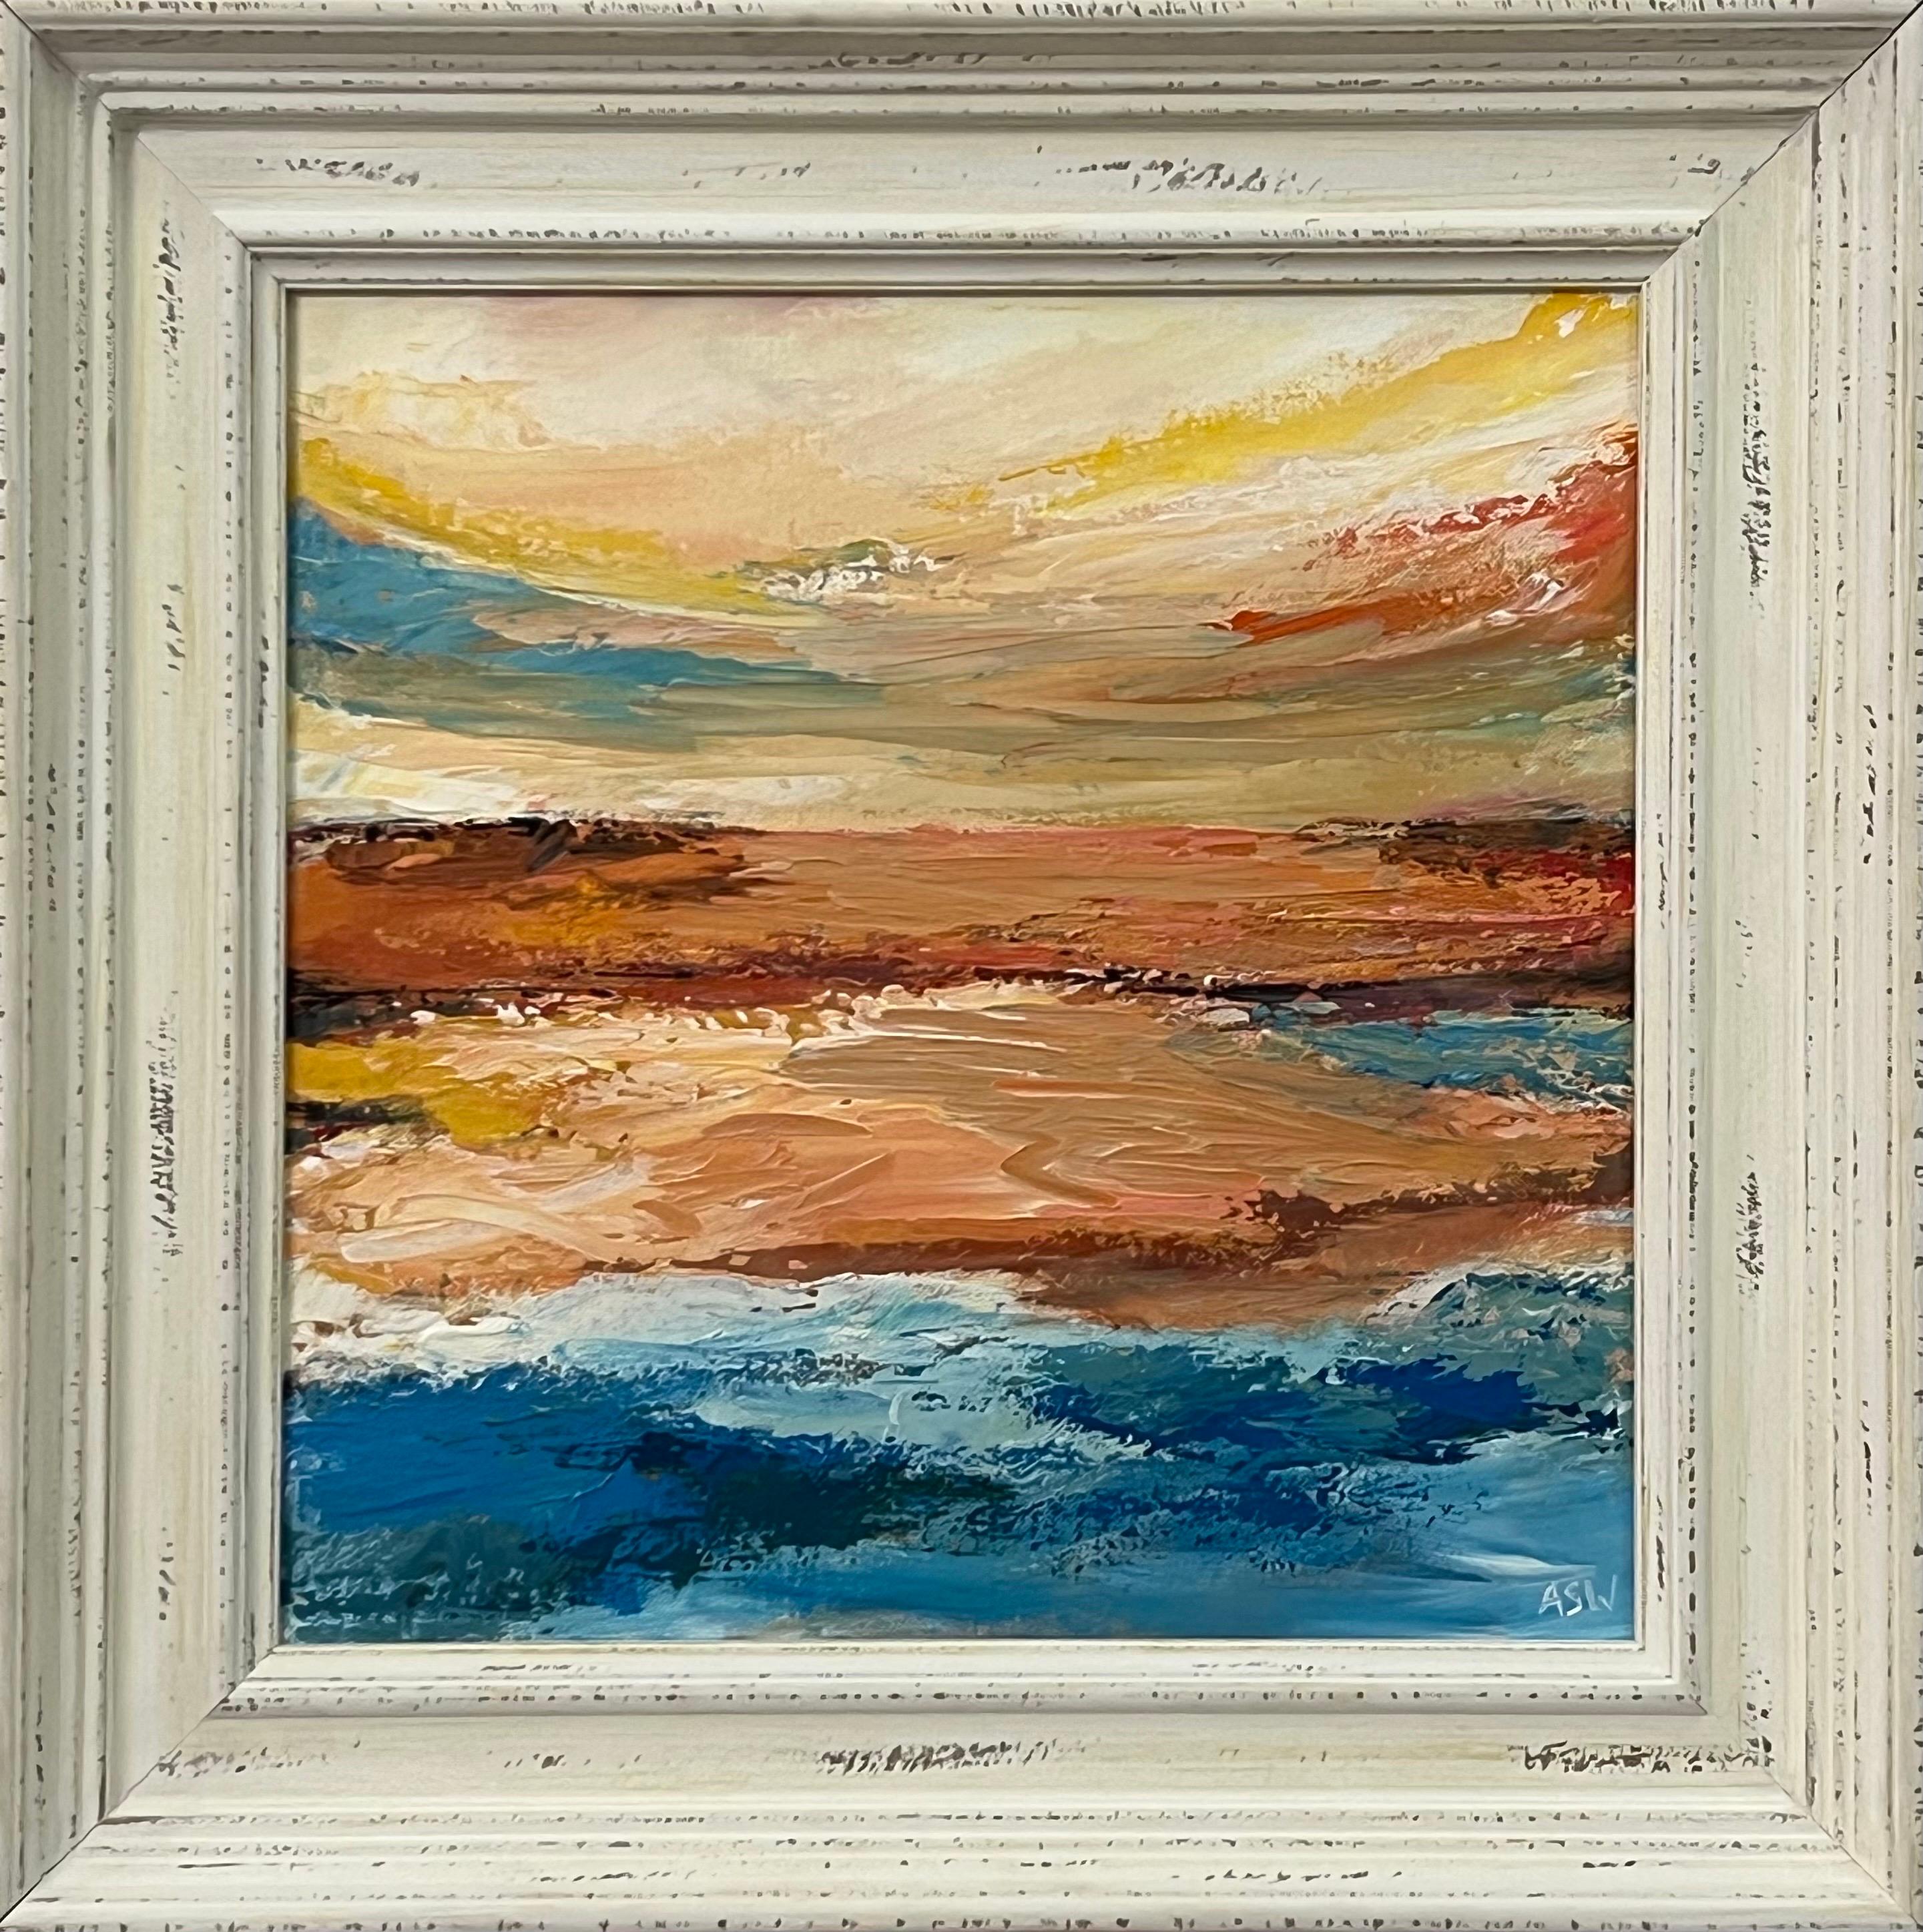 Expressive Abstract Seascape Landscape Painting by Contemporary British Artist